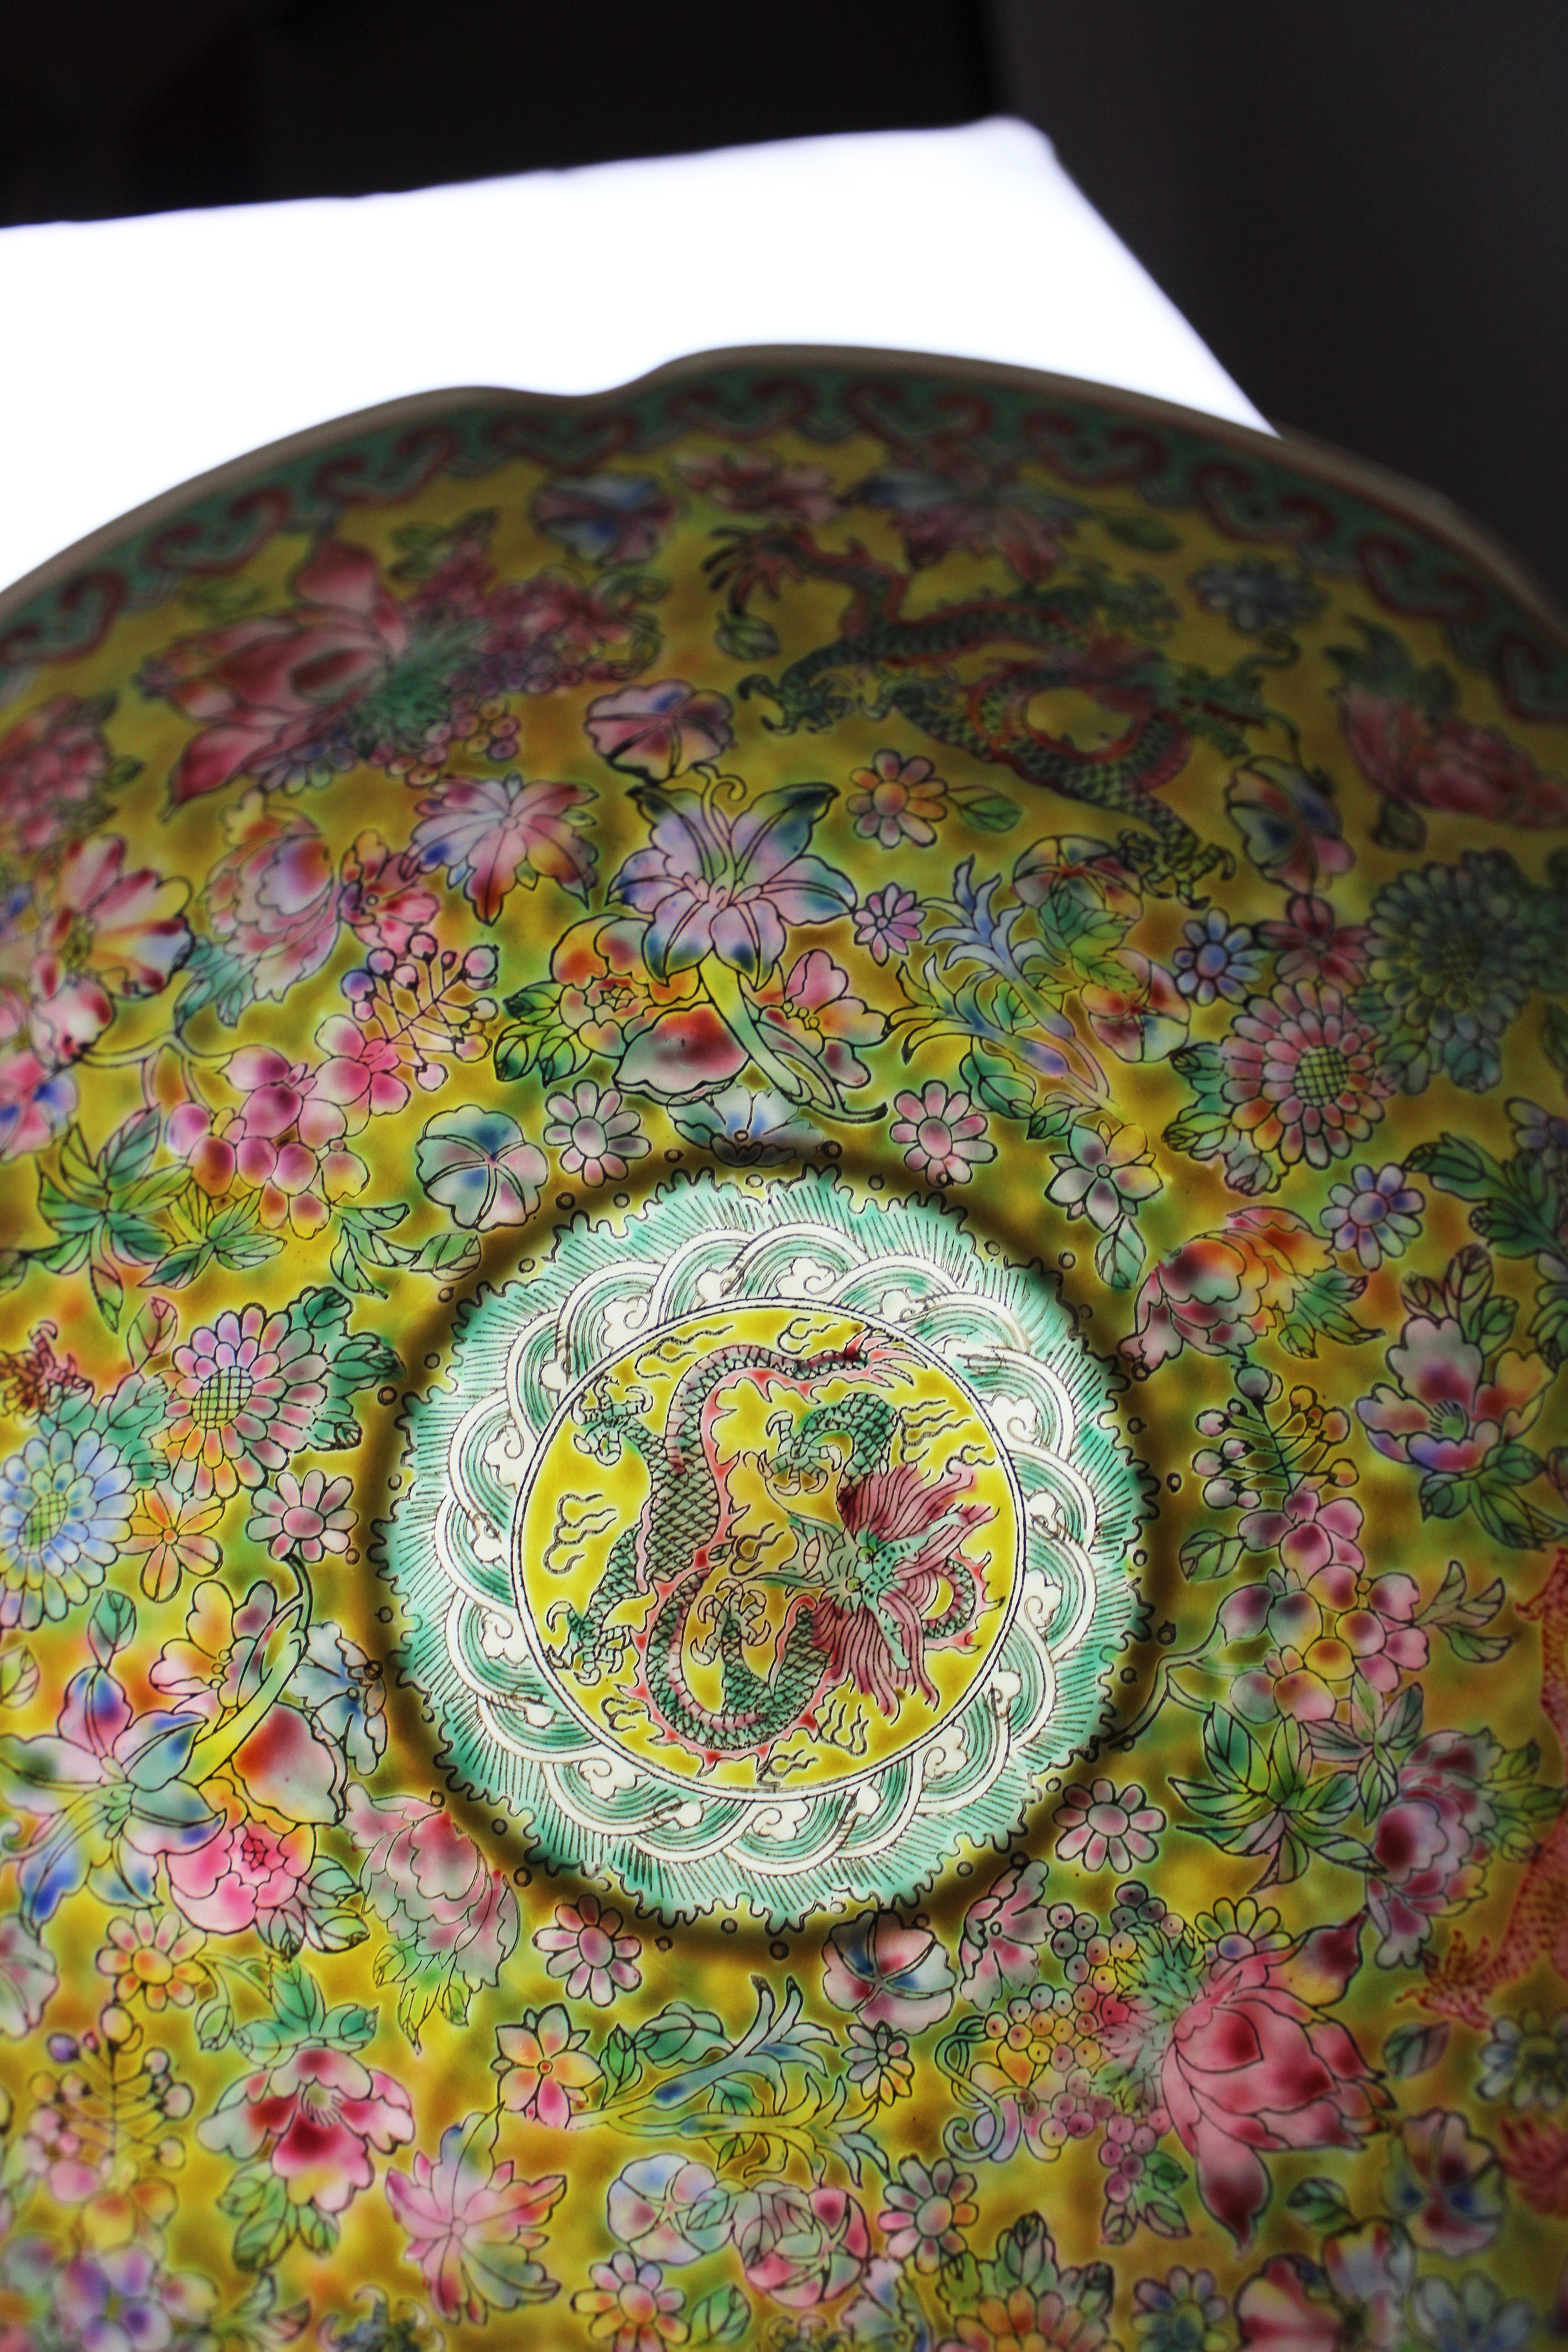 Presenting an exquisite piece of Chinese craftsmanship: the Imperial Yellow Bowl, crafted from delicate eggshell porcelain in the 20th century. Adorned with intricate depictions of eight five clawed dragons, this bowl exudes regal elegance and